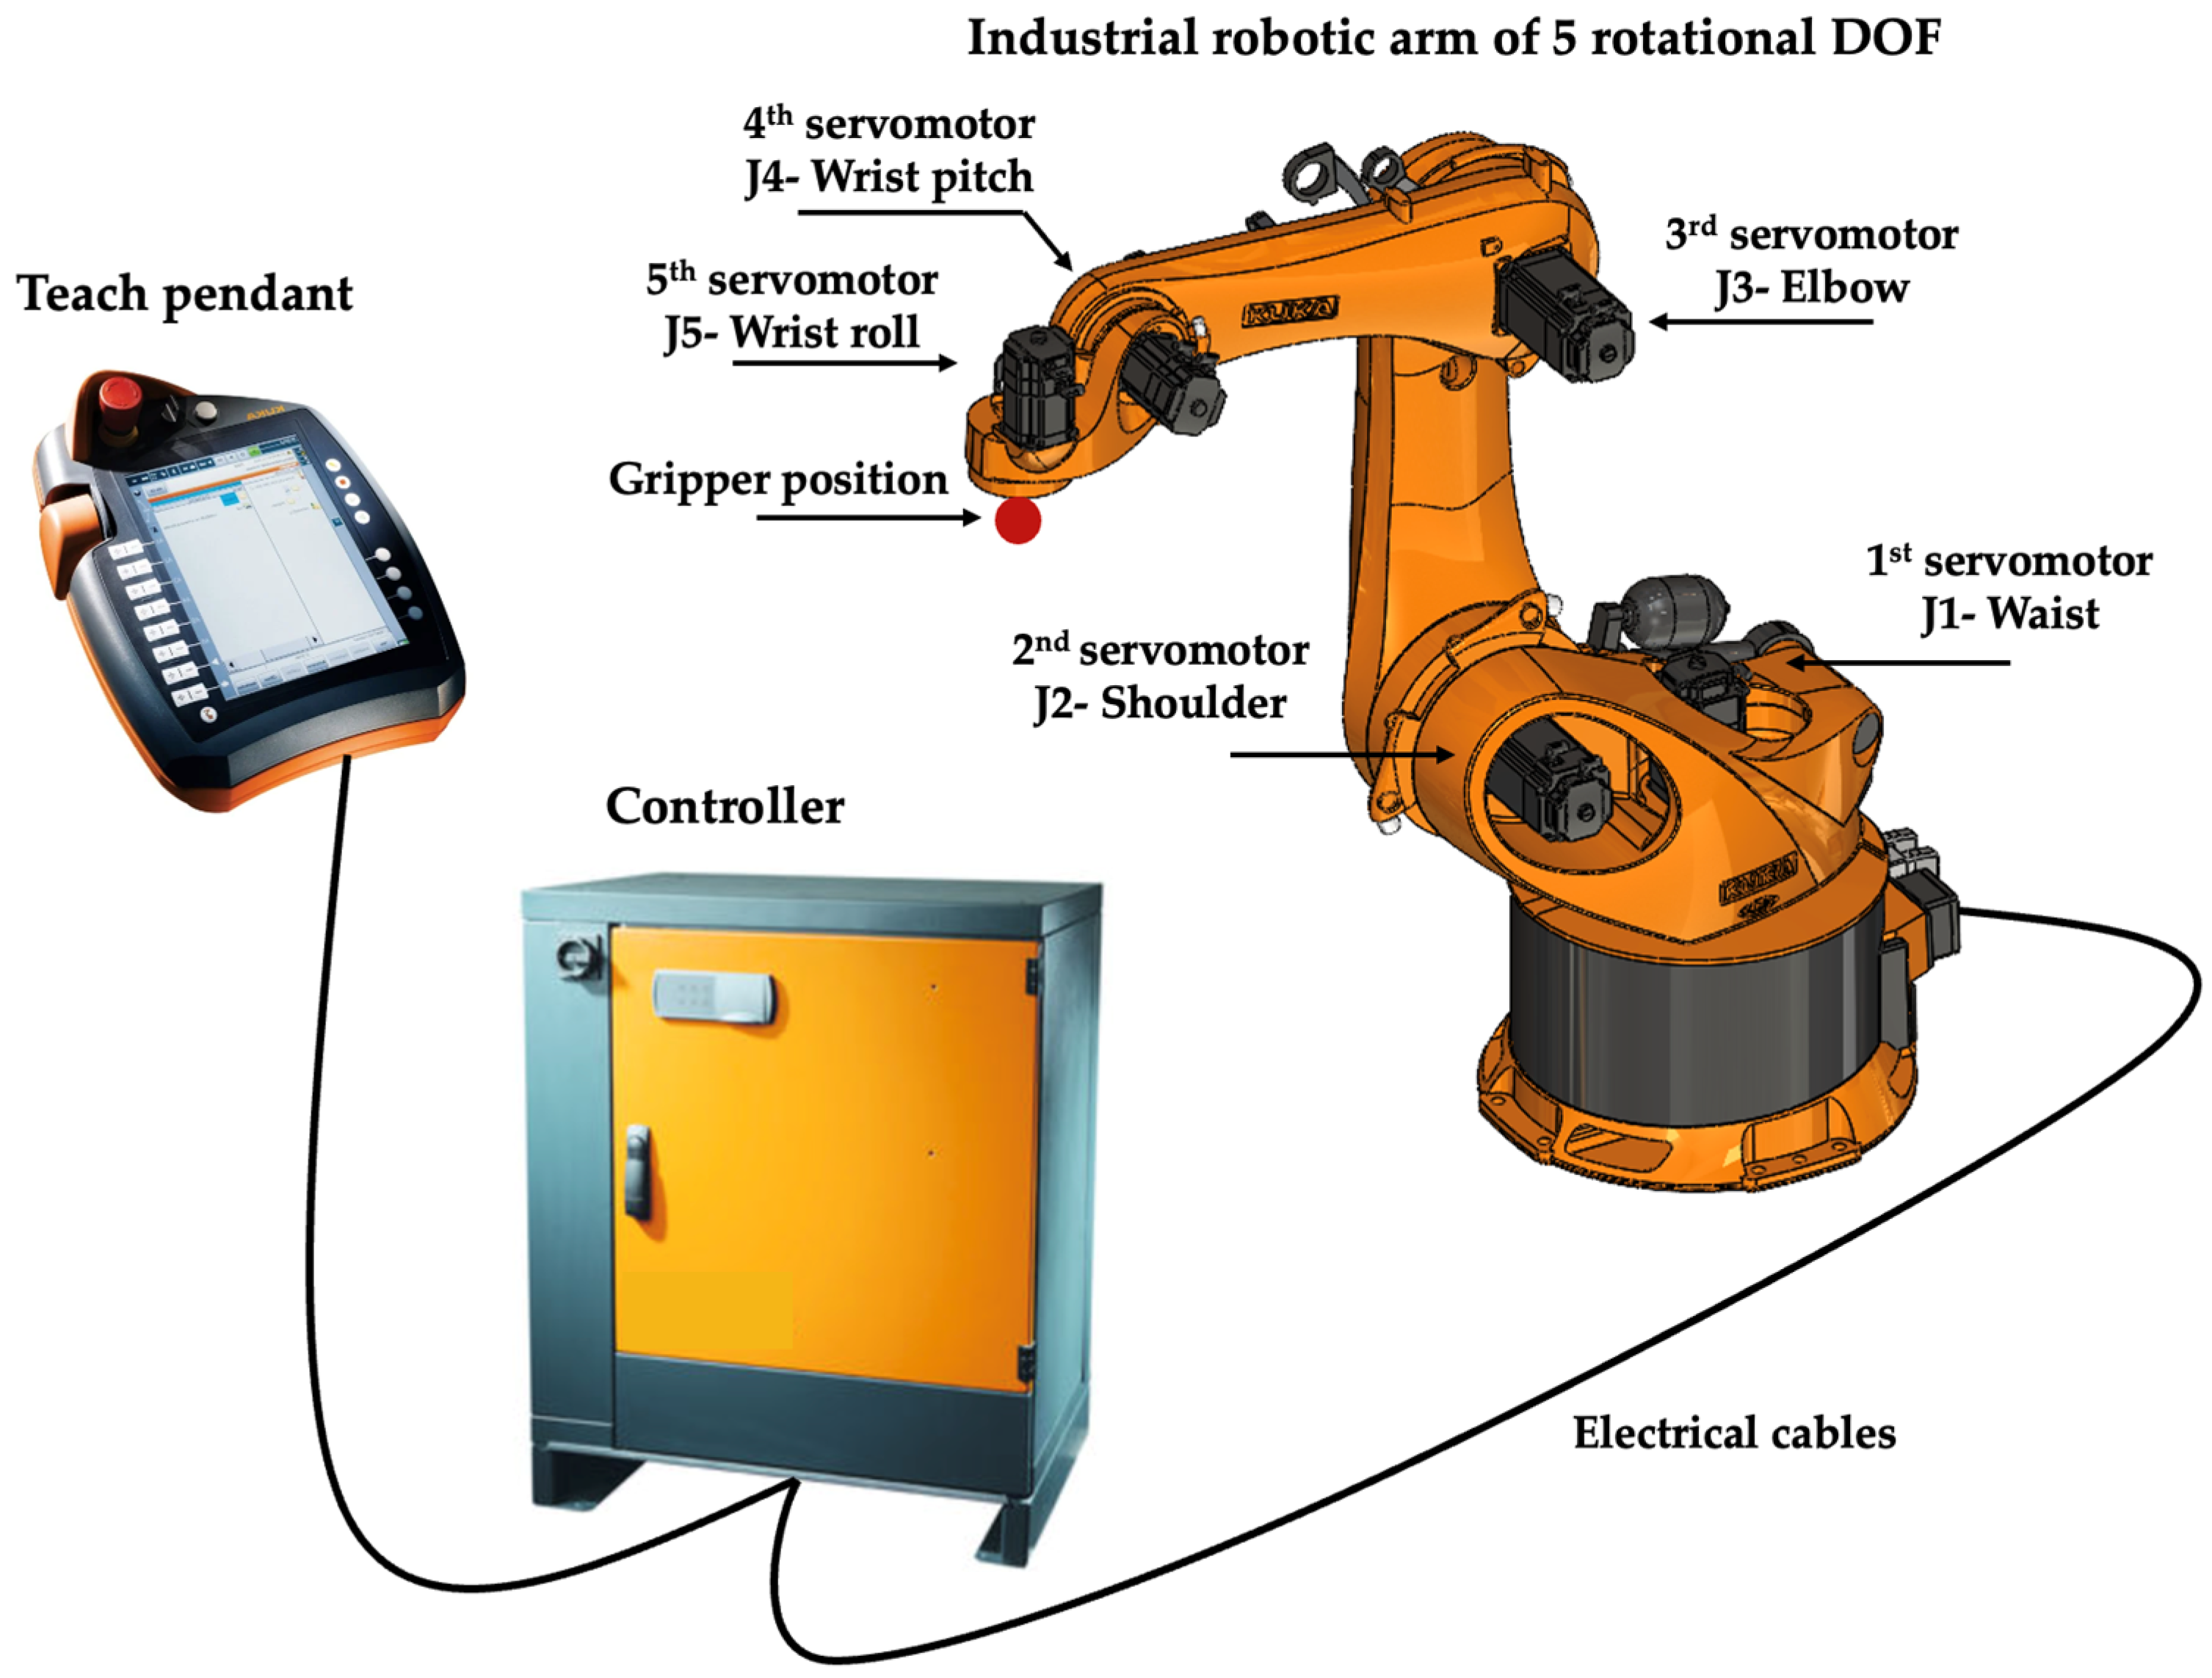 Energies | Free Full-Text | Optimization of Energy Consumption of  Industrial Robots Using Classical PID and MPC Controllers